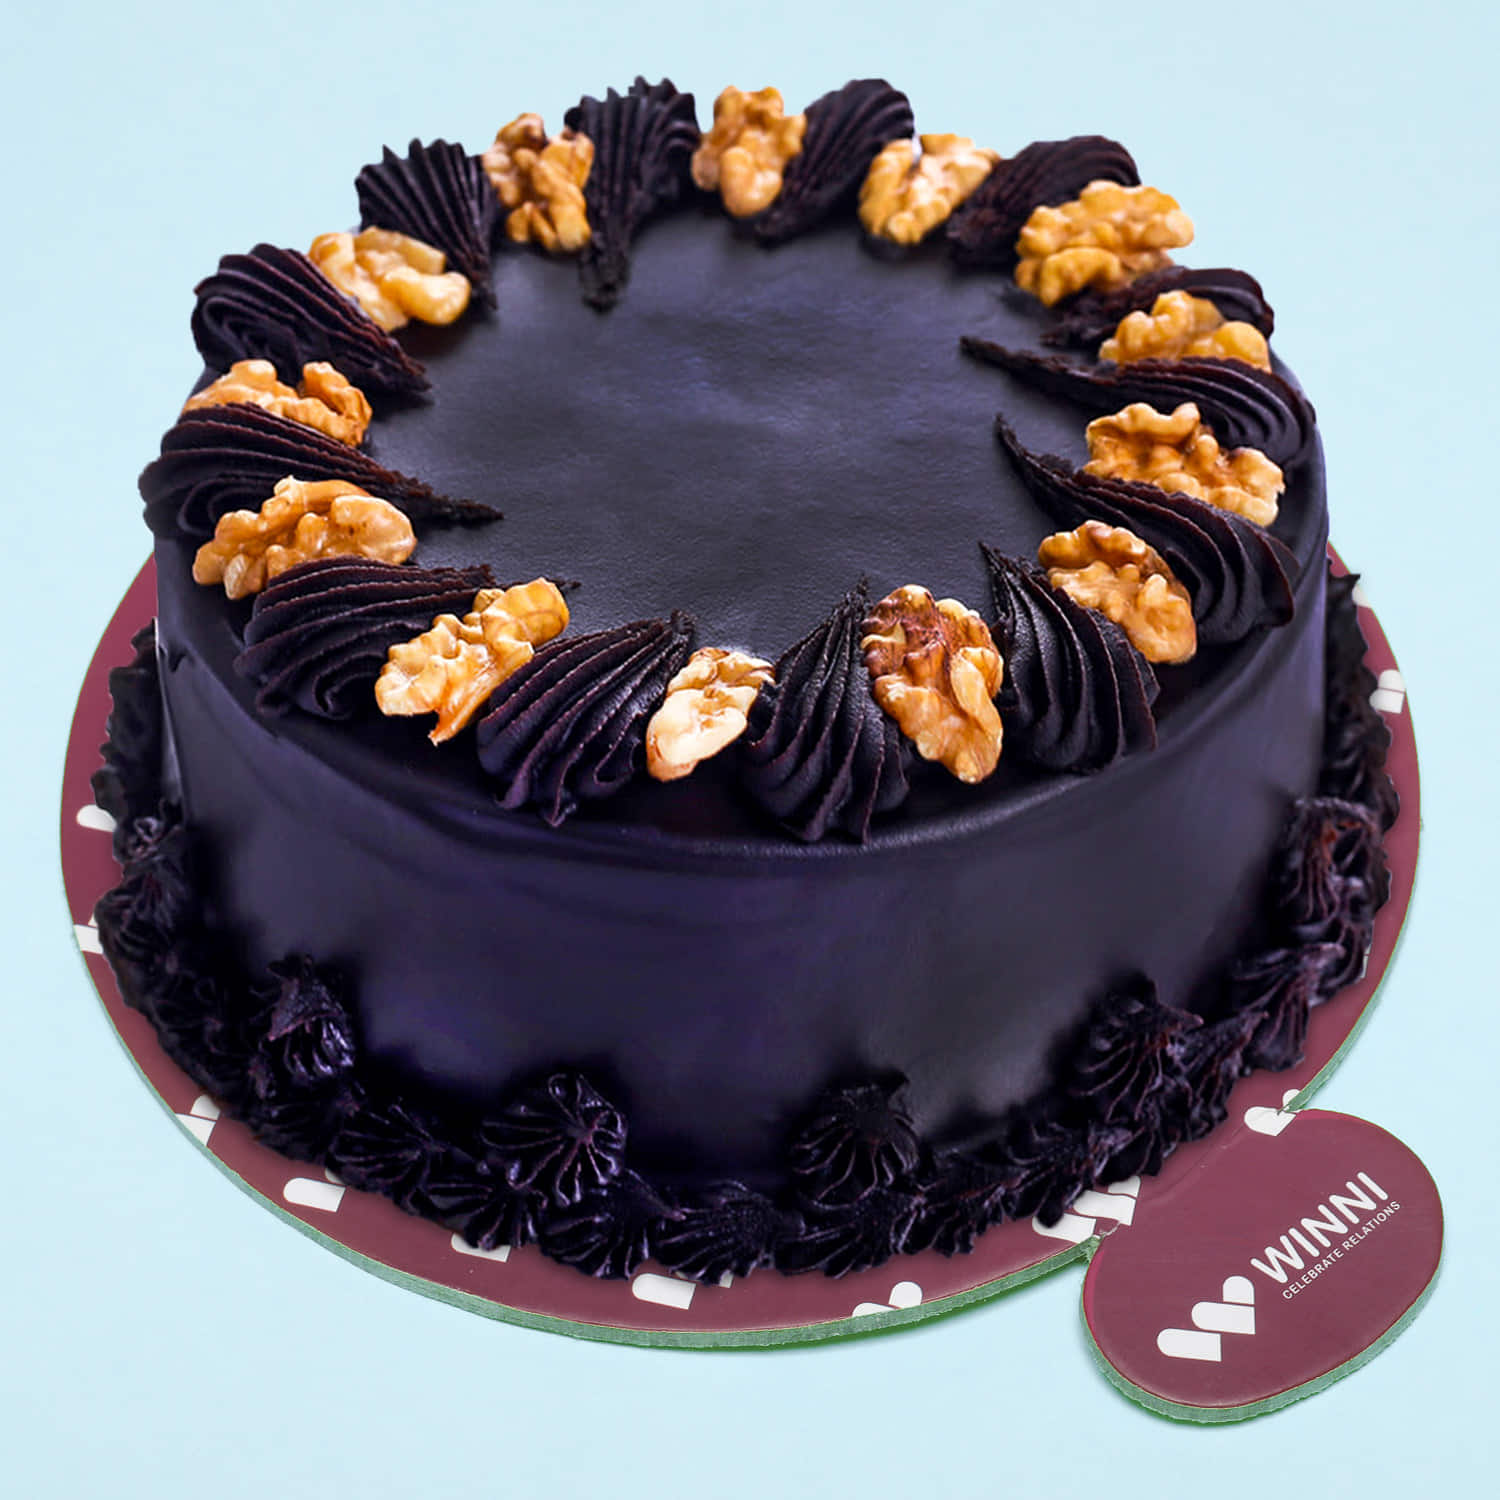 Date Walnut Cake Order Online Bangalore | Tea Time cake Online Delivery